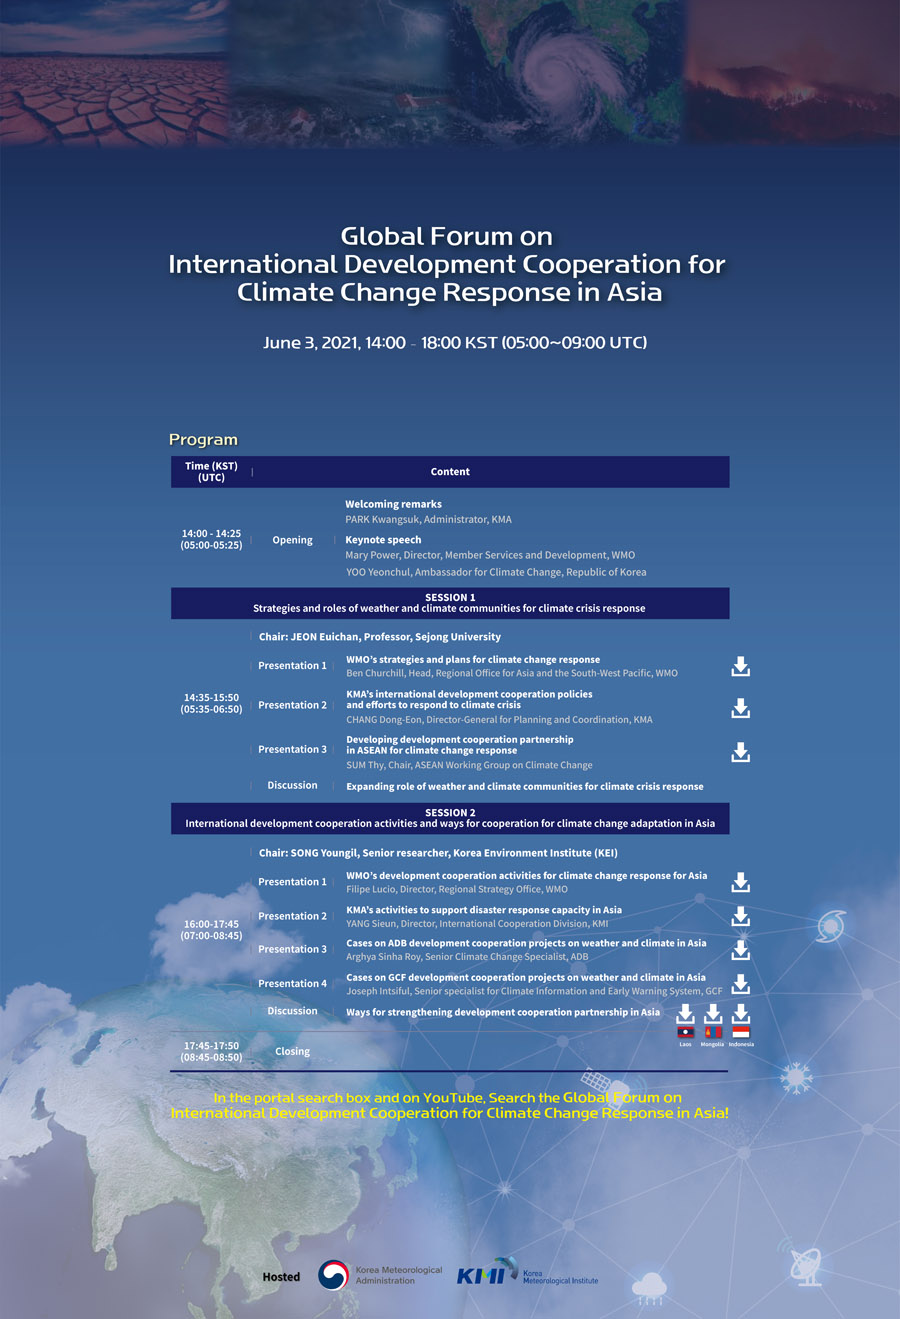 Global Forum on International Development Cooperation for Climate Change Response in Asia